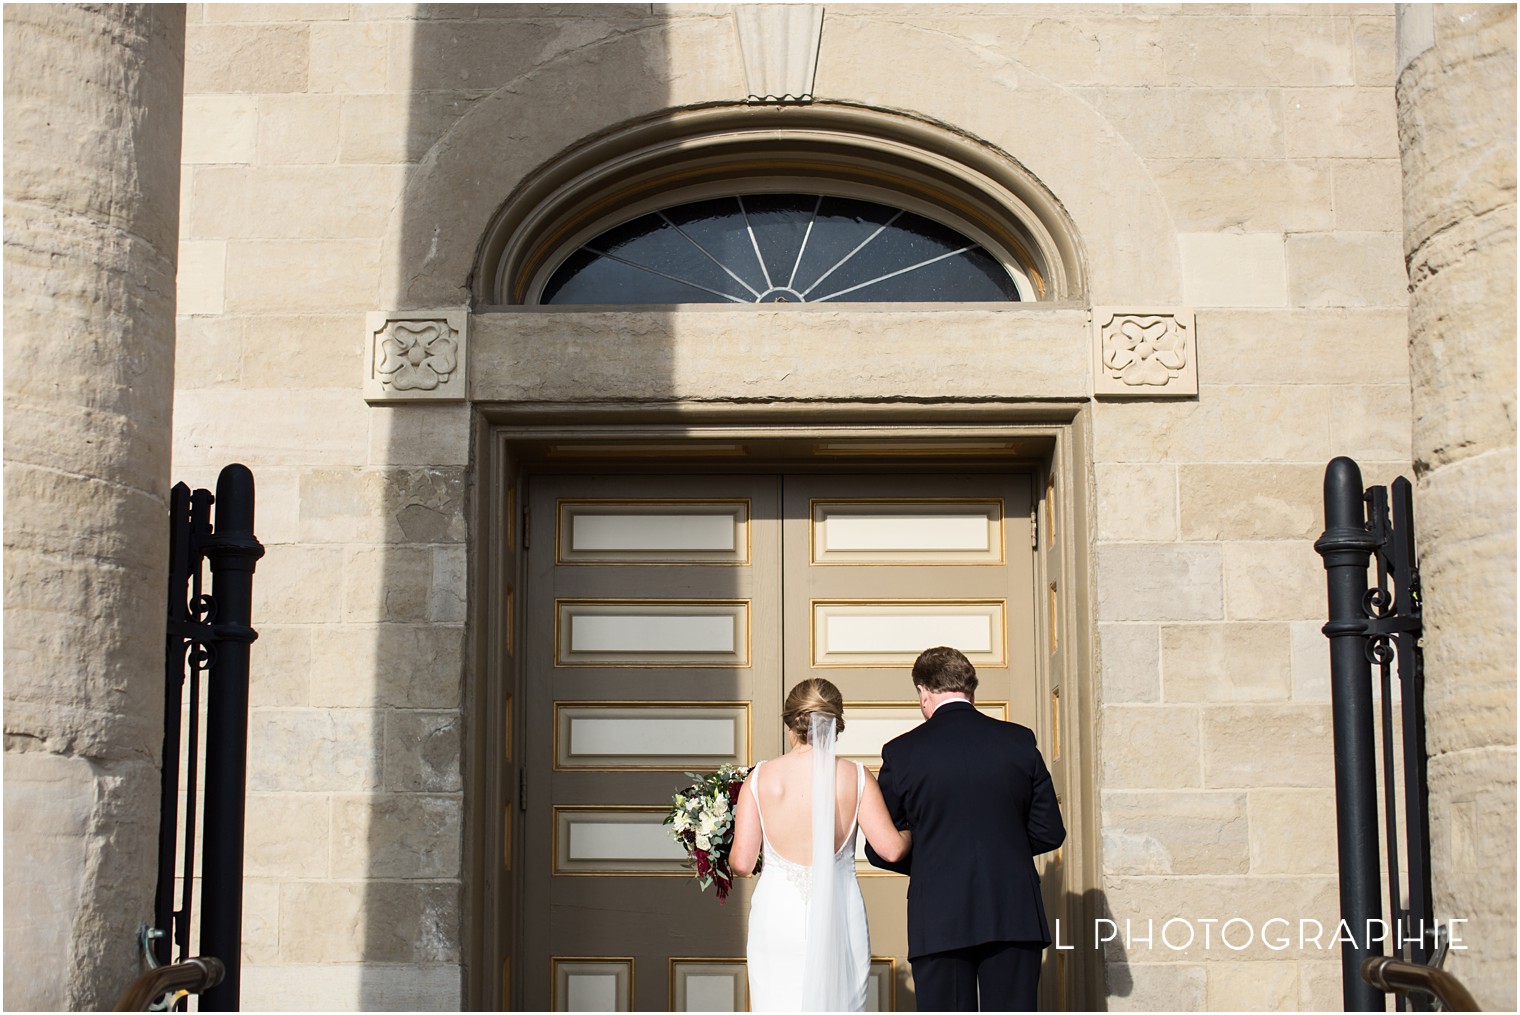 612 North,Four Seasons,Kate Hayes,L Photographie,L Photographie weddings,Midwest wedding photographer,October wedding,Old Cathedral,St. Louis wedding,St. Louis wedding photographer,St. Louis wedding photography,burgundy bridesmaid dress,fall wedding,first look,